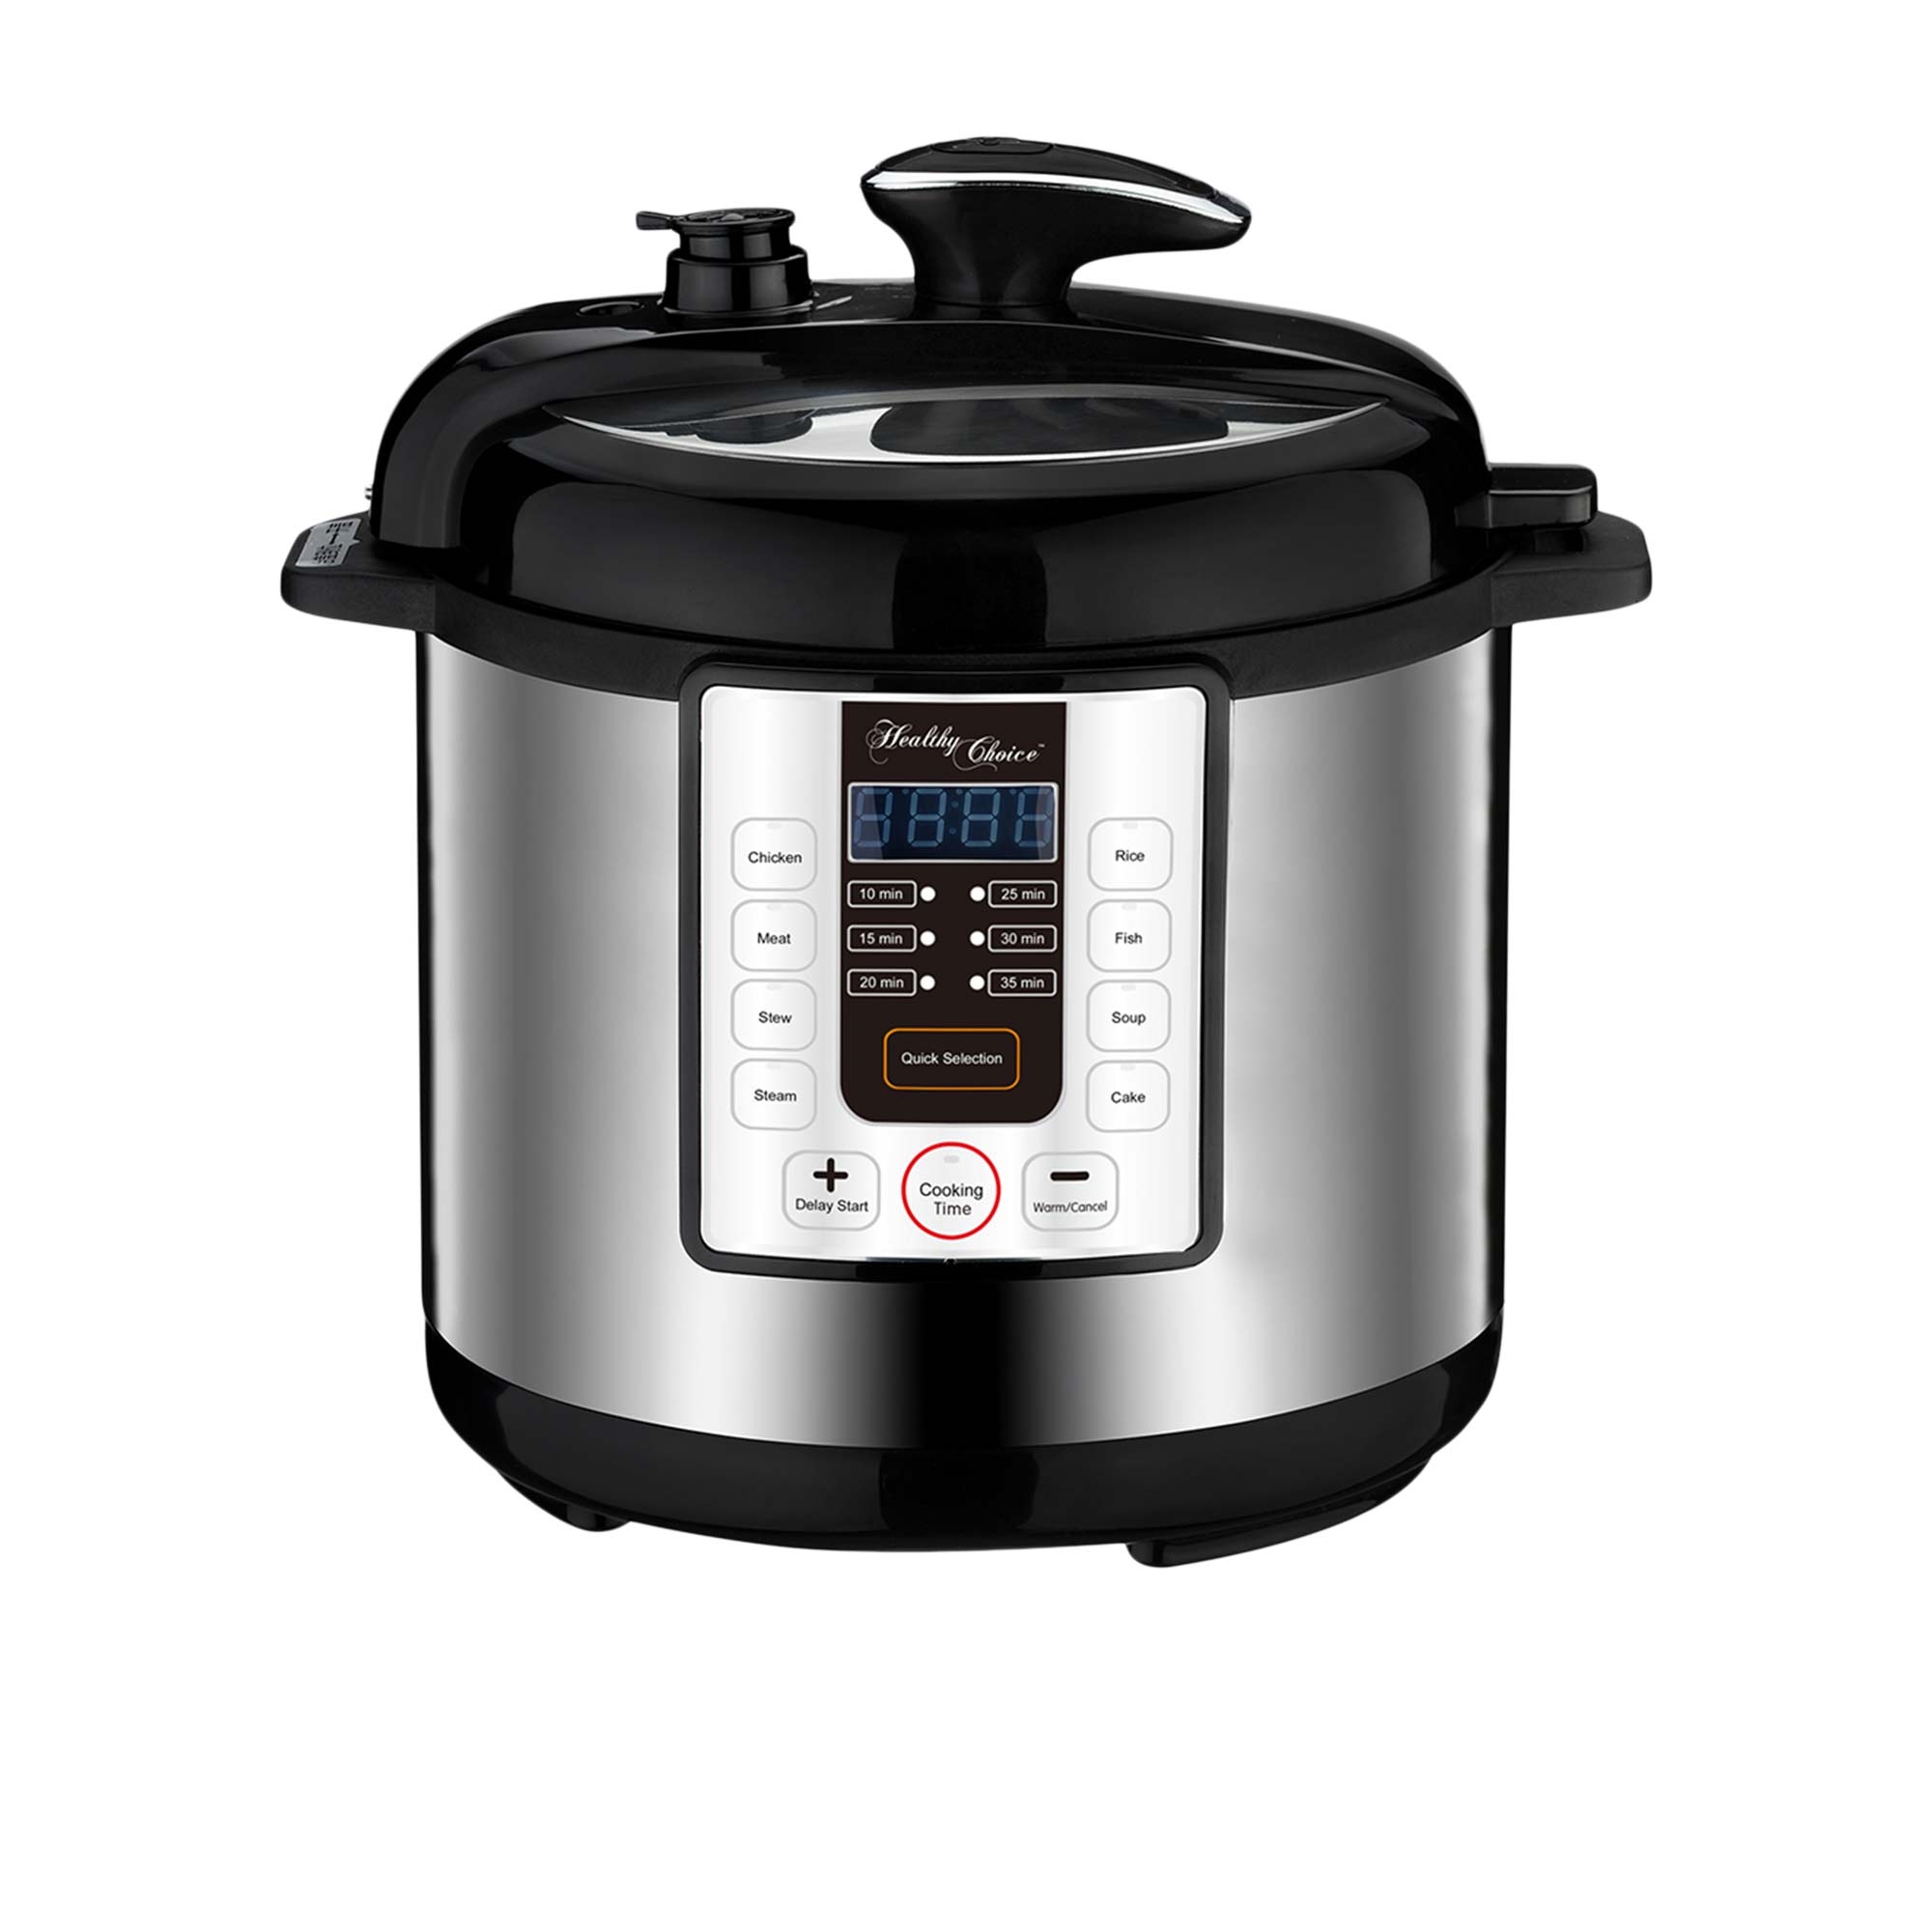 Healthy Choice Pressure Cooker 6L Silver Image 1